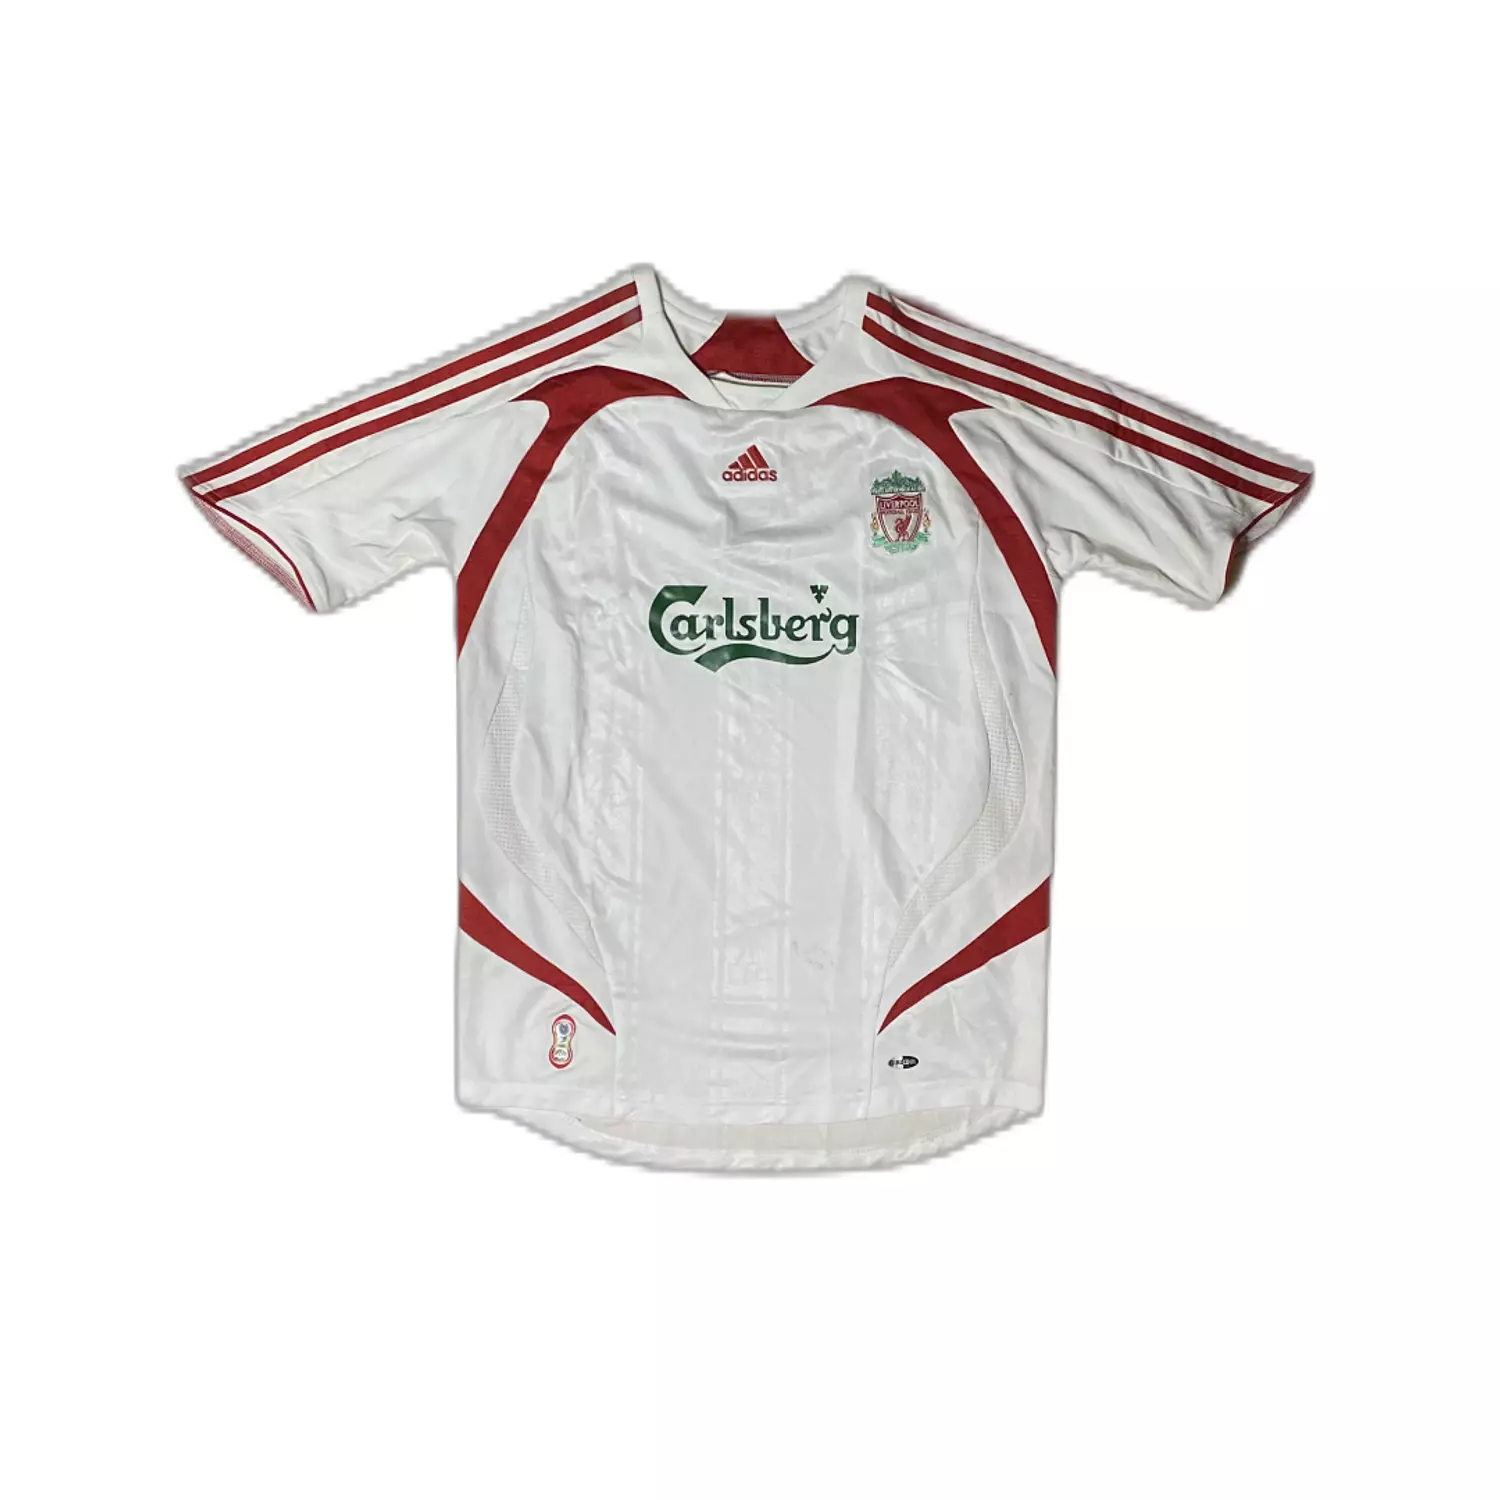 Liverpool 2007/08 Away Kit (S)  hover image